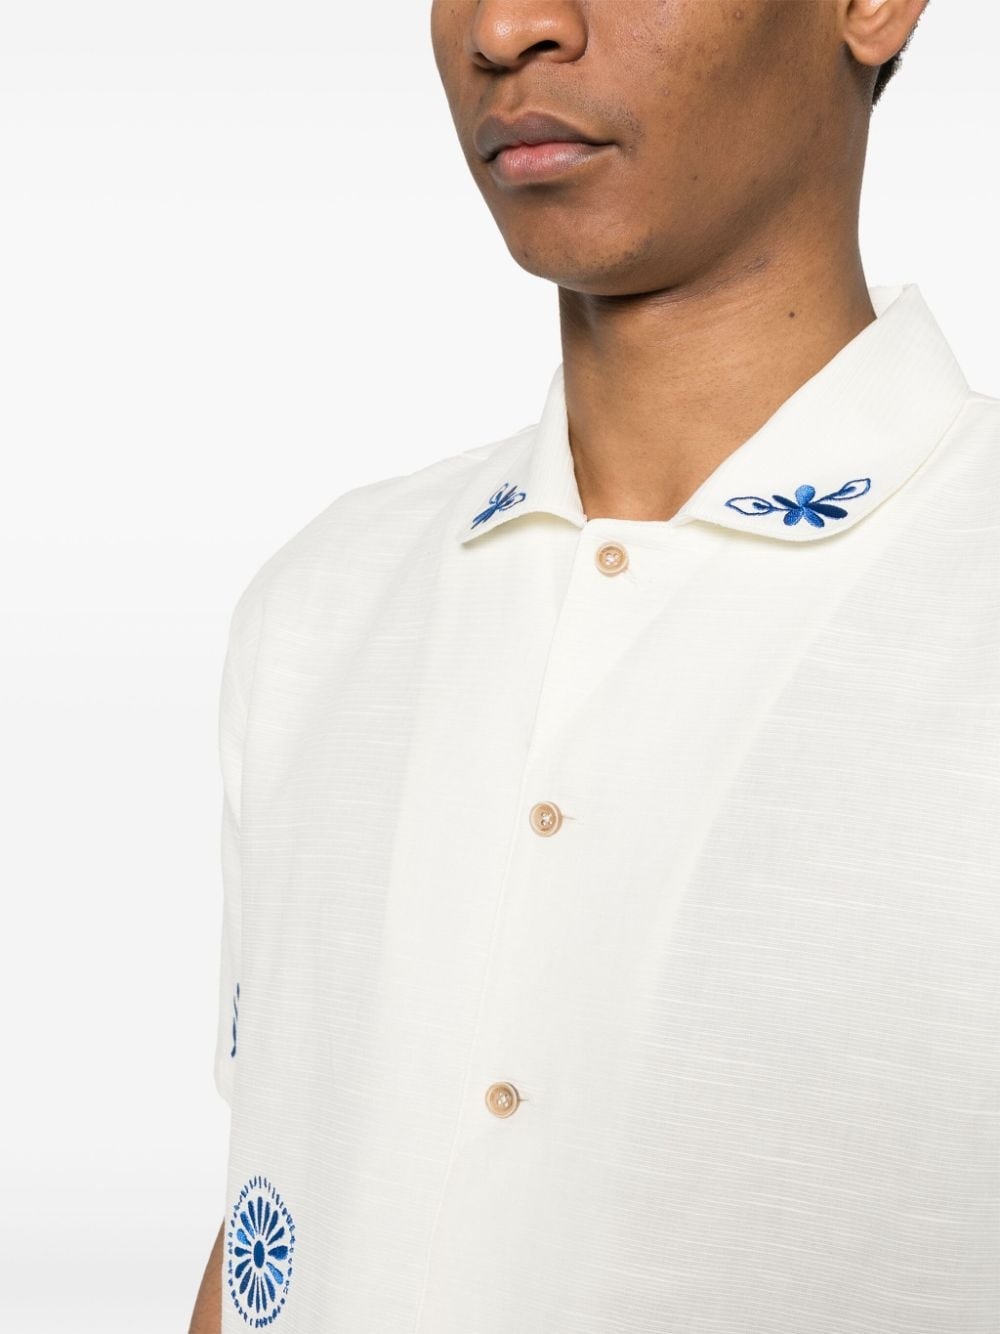 embroidered textured shirt - 5